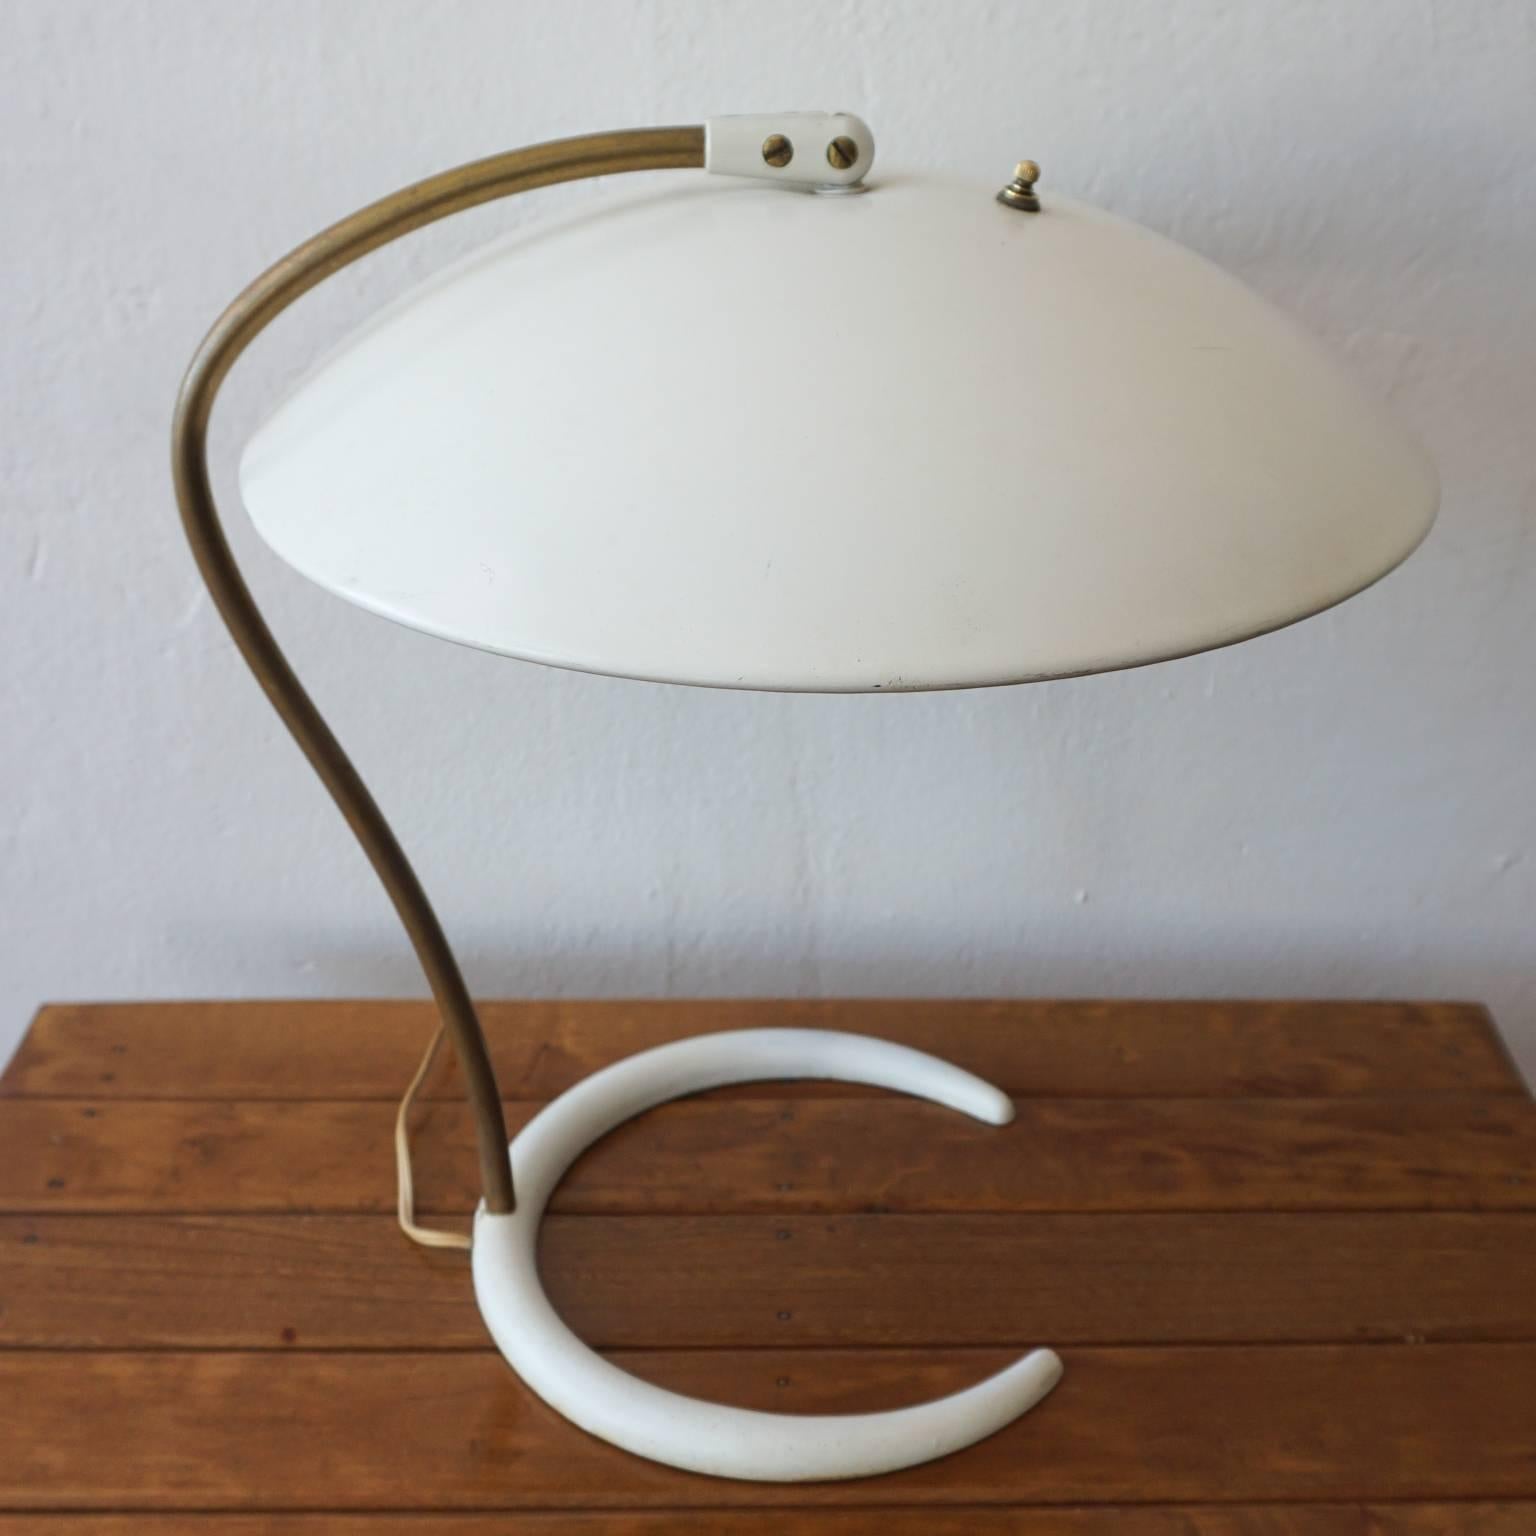 Dual bulb adjustable saucer shade by Gerald Thurston for Lightolier. Cast iron crescent base, brass tubing and enameled metal shade.